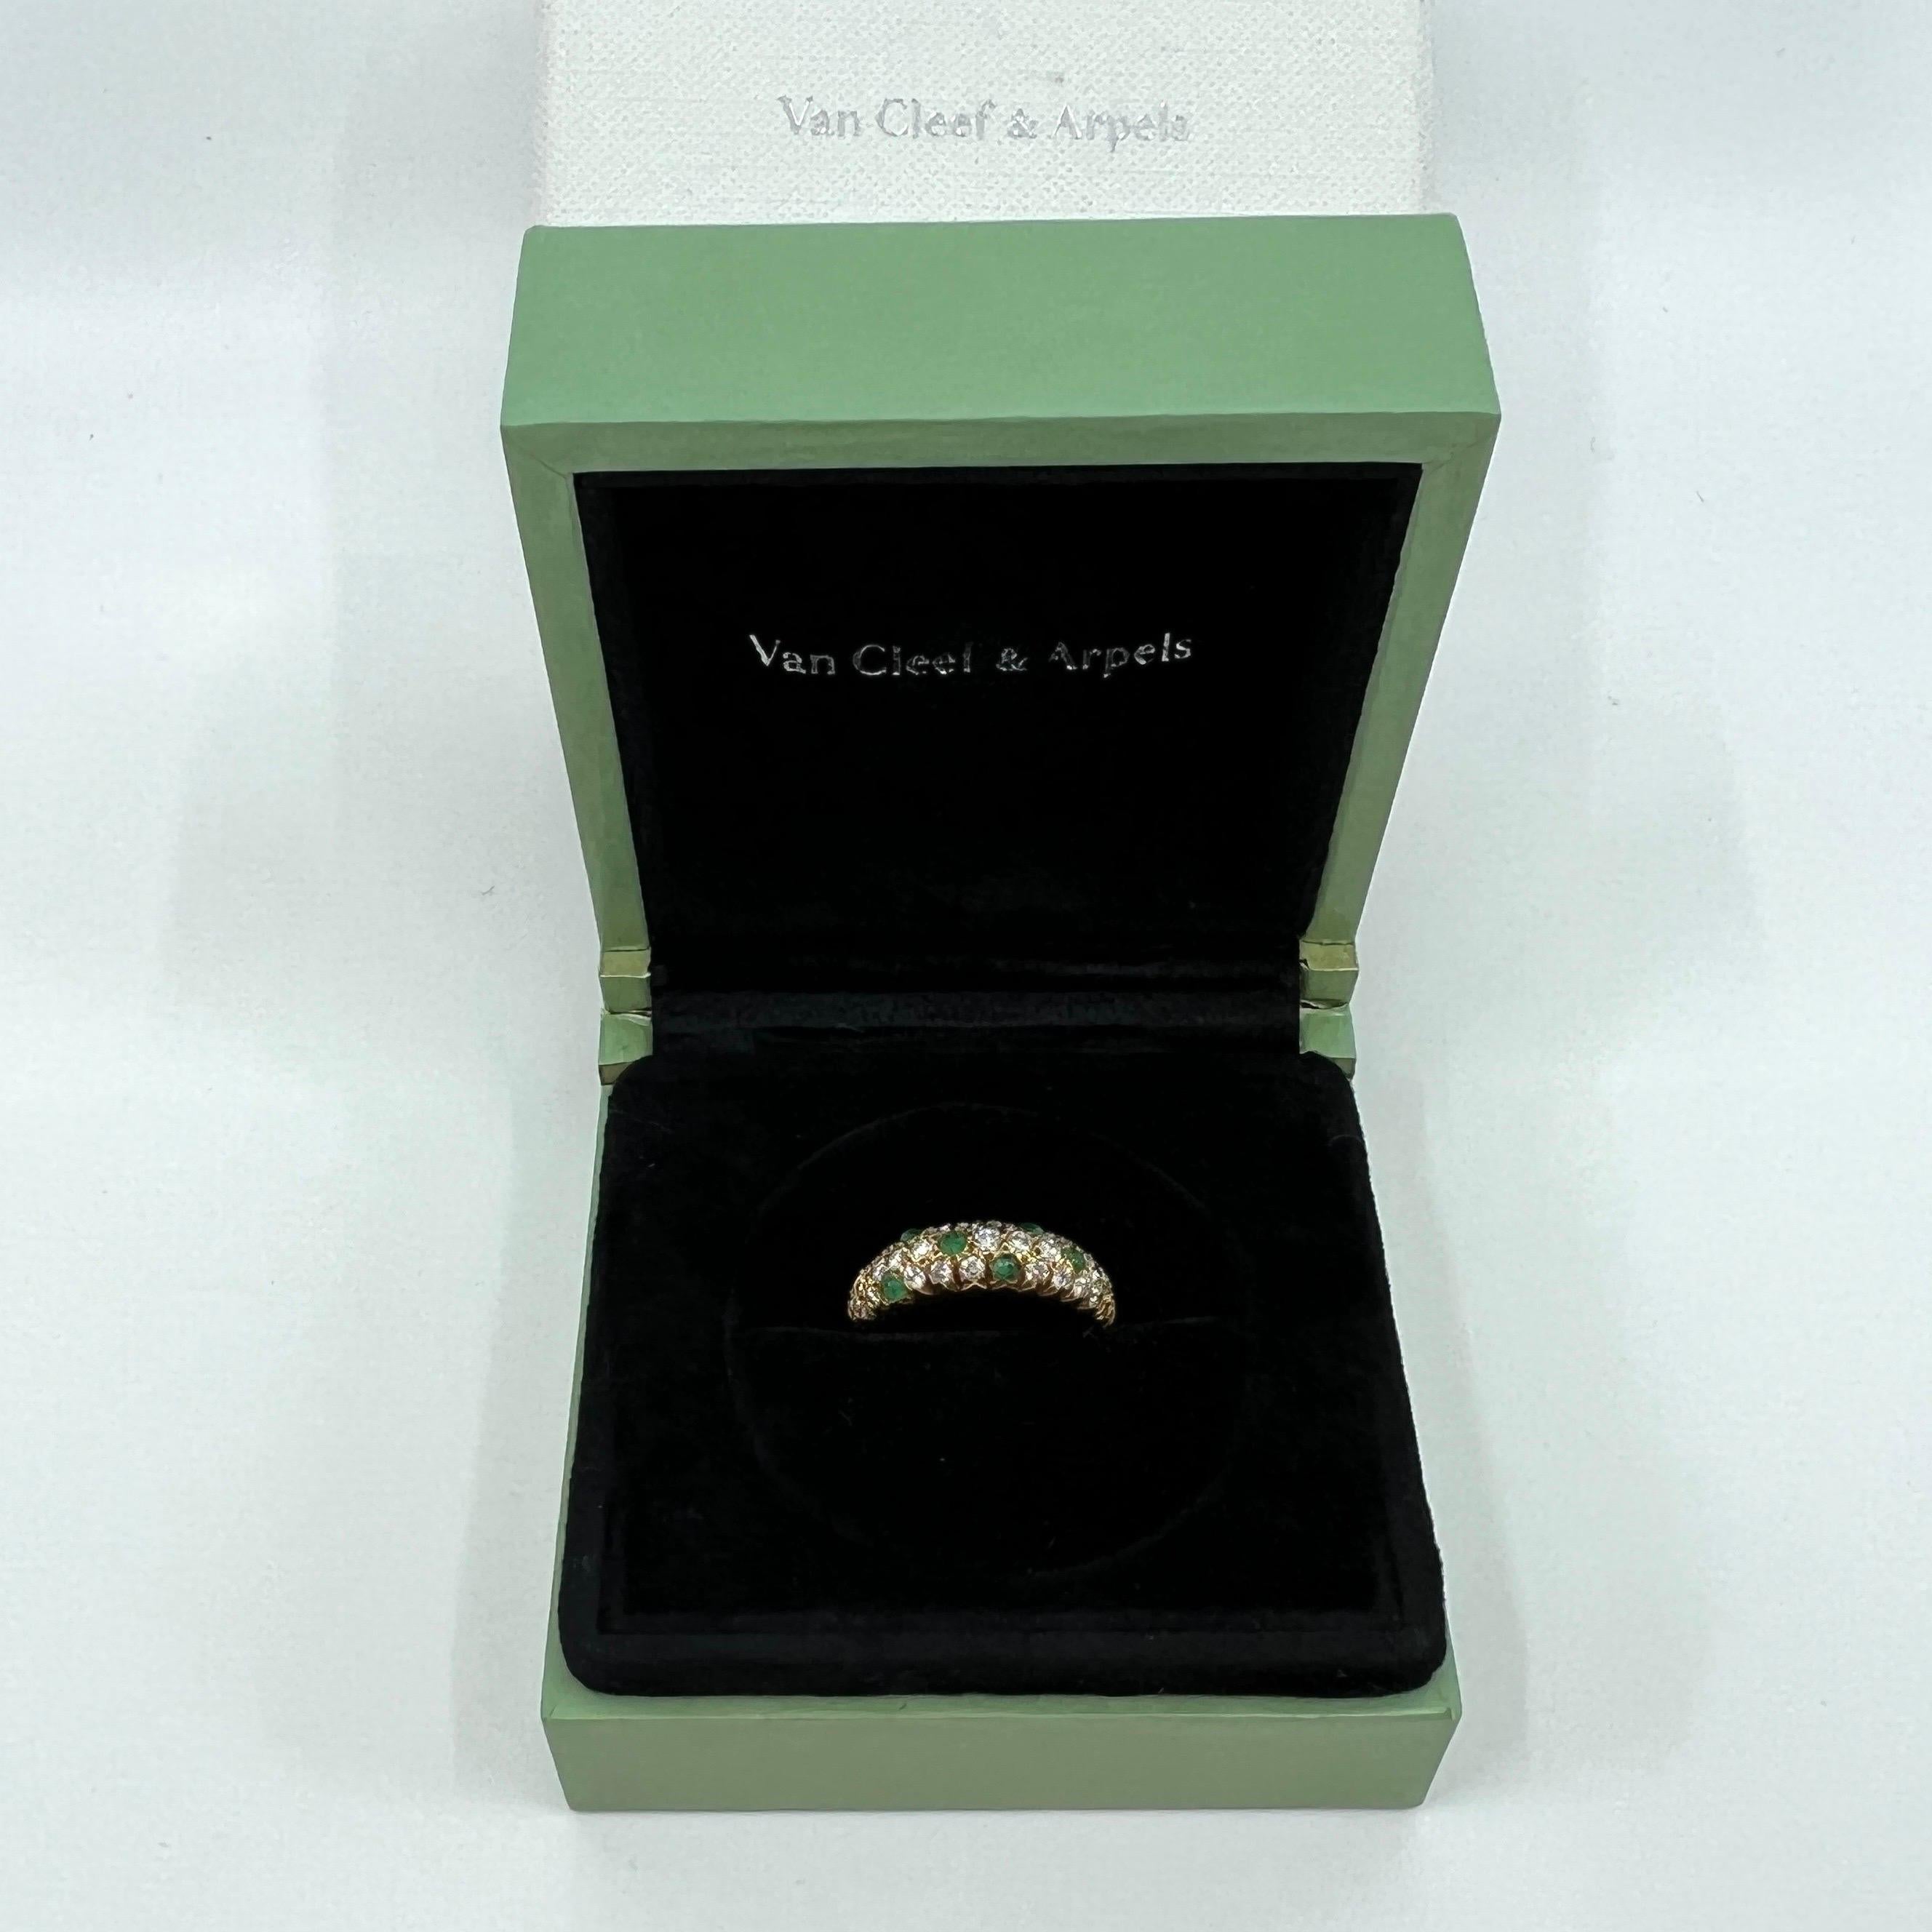 Very Rare Vintage Van Cleef & Arpels 18k Yellow Gold Emerald & Diamond Pave Ring.

This beautifully made ring featuring round brilliant cut diamonds and round cabochon emeralds beautifully set in a domed half eternity style ring.

The diamonds and